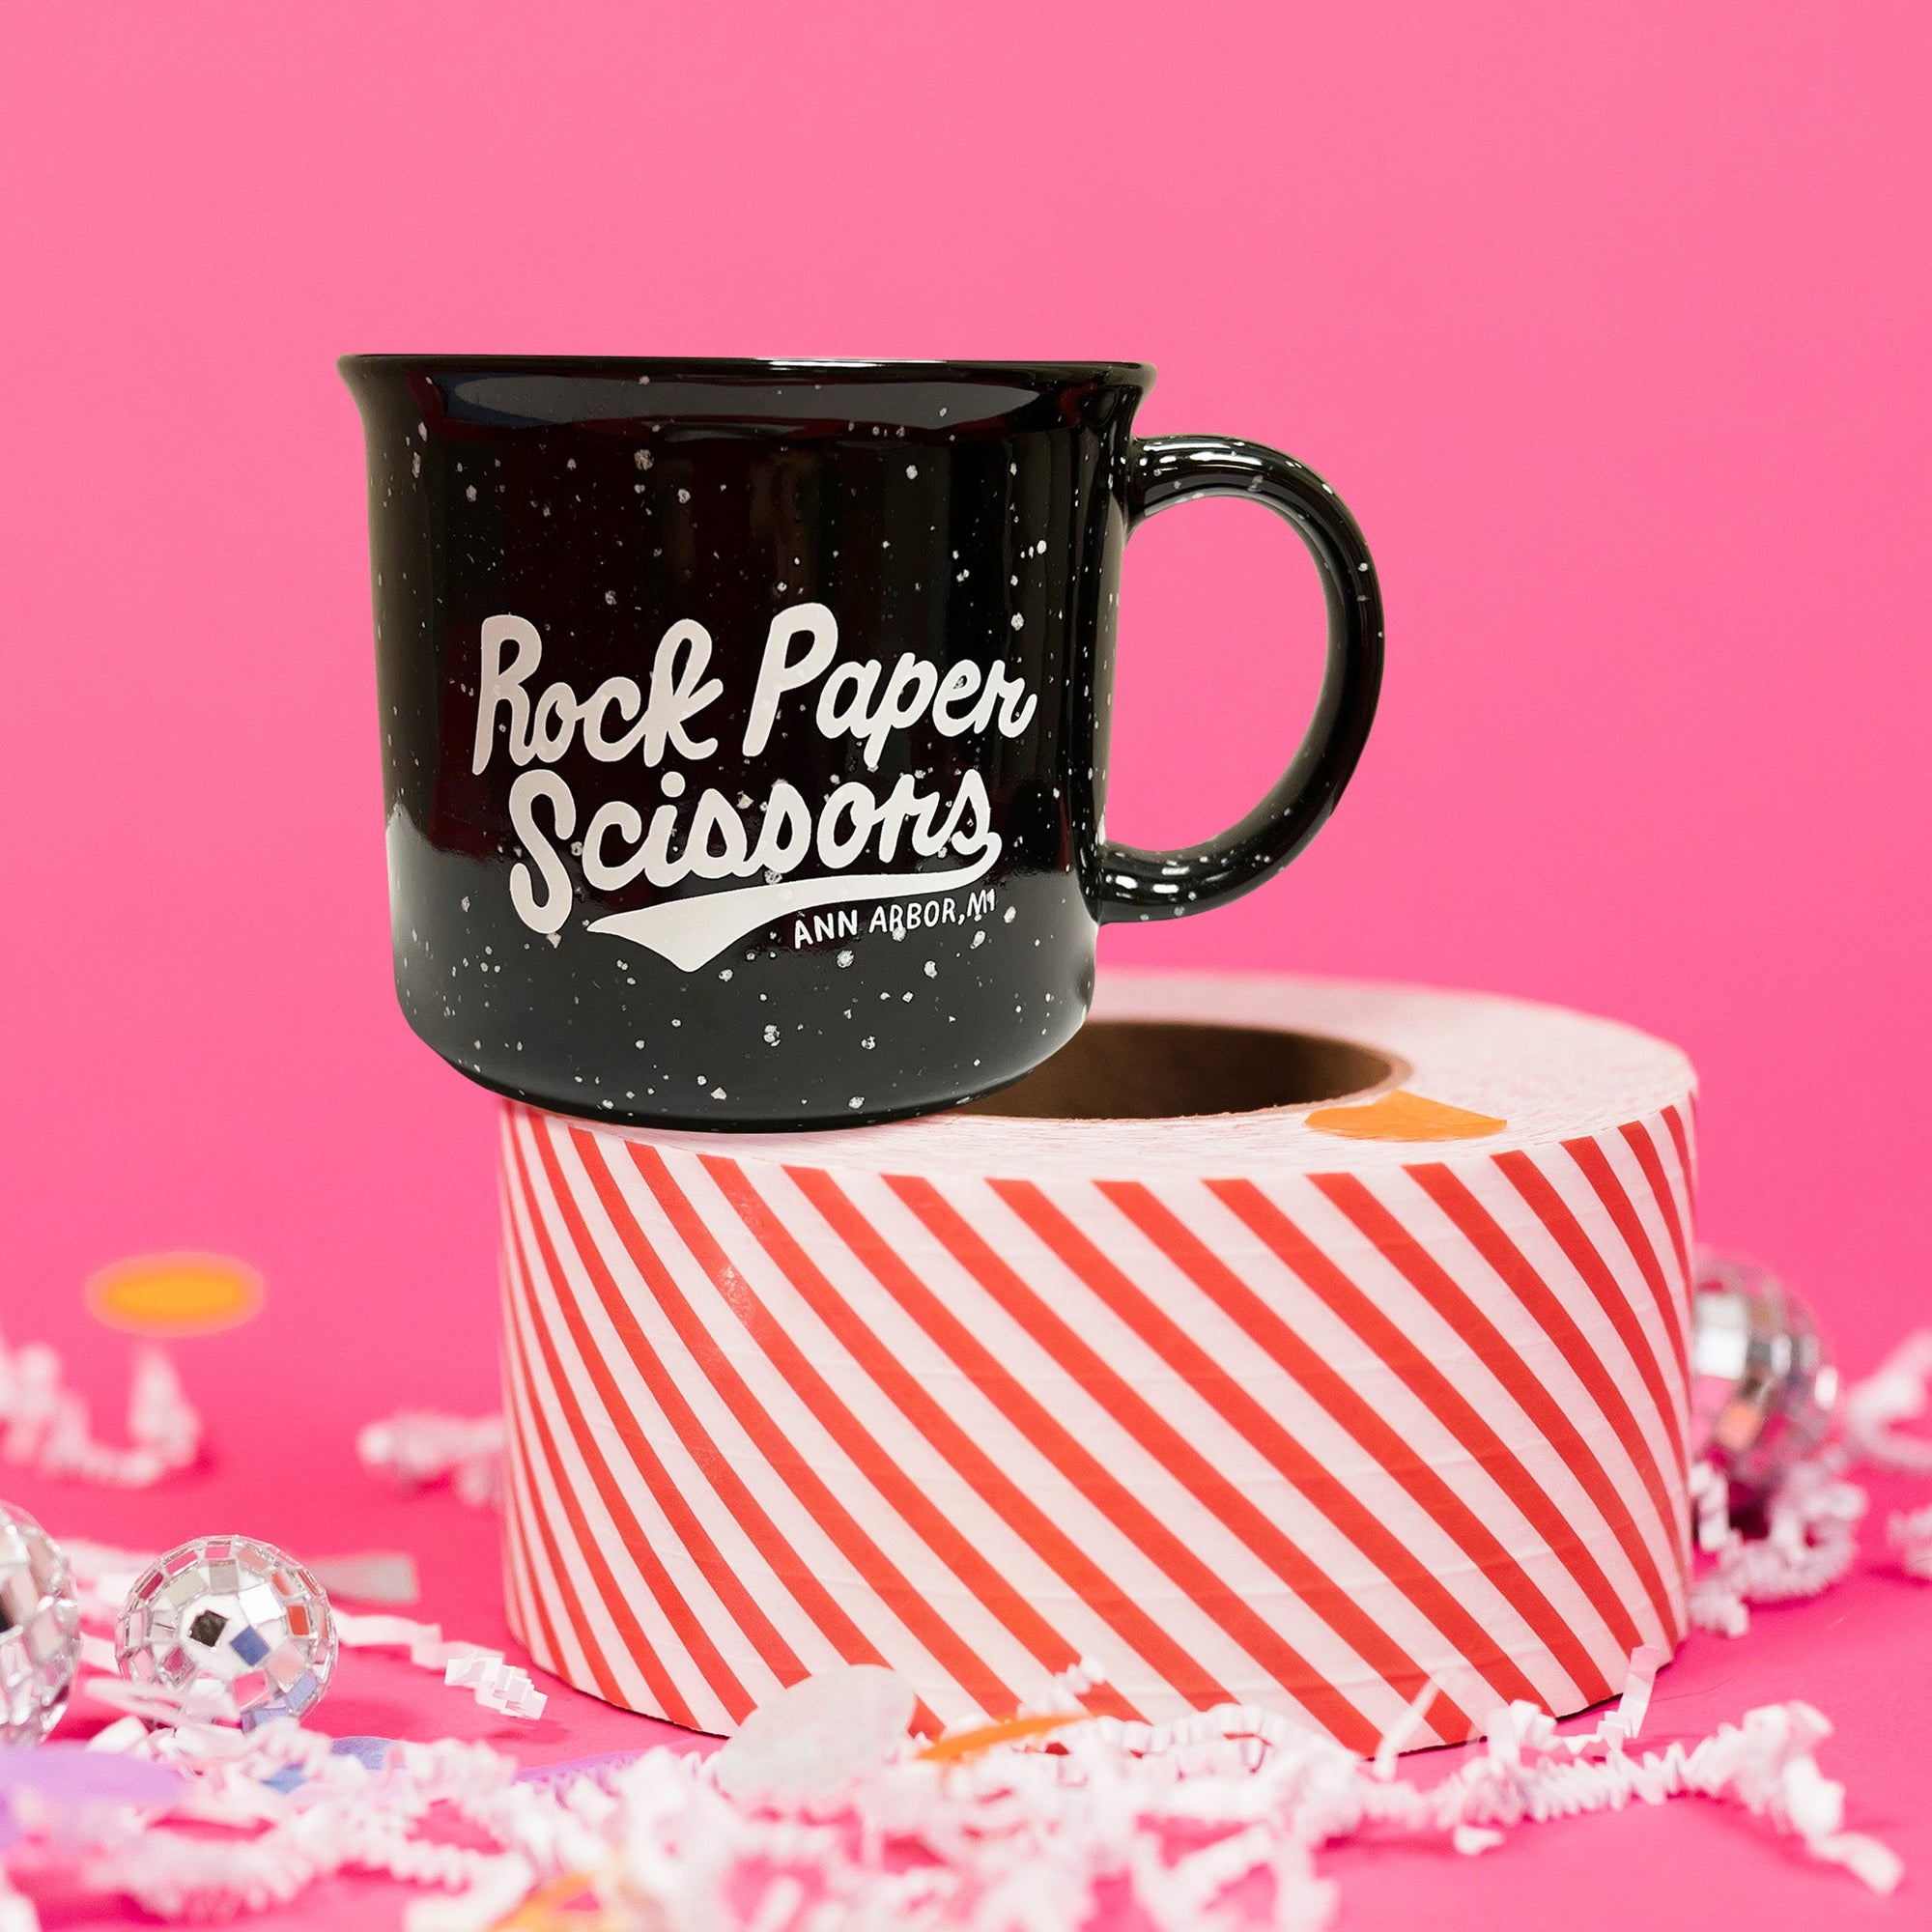 On a hot pink background sits a mug with white crinkle and big, colorful confetti scattered around. There are mini disco balls. This is a black campfire mug with white specks and it says "Rock Paper Scissors" in white, hand lettering.